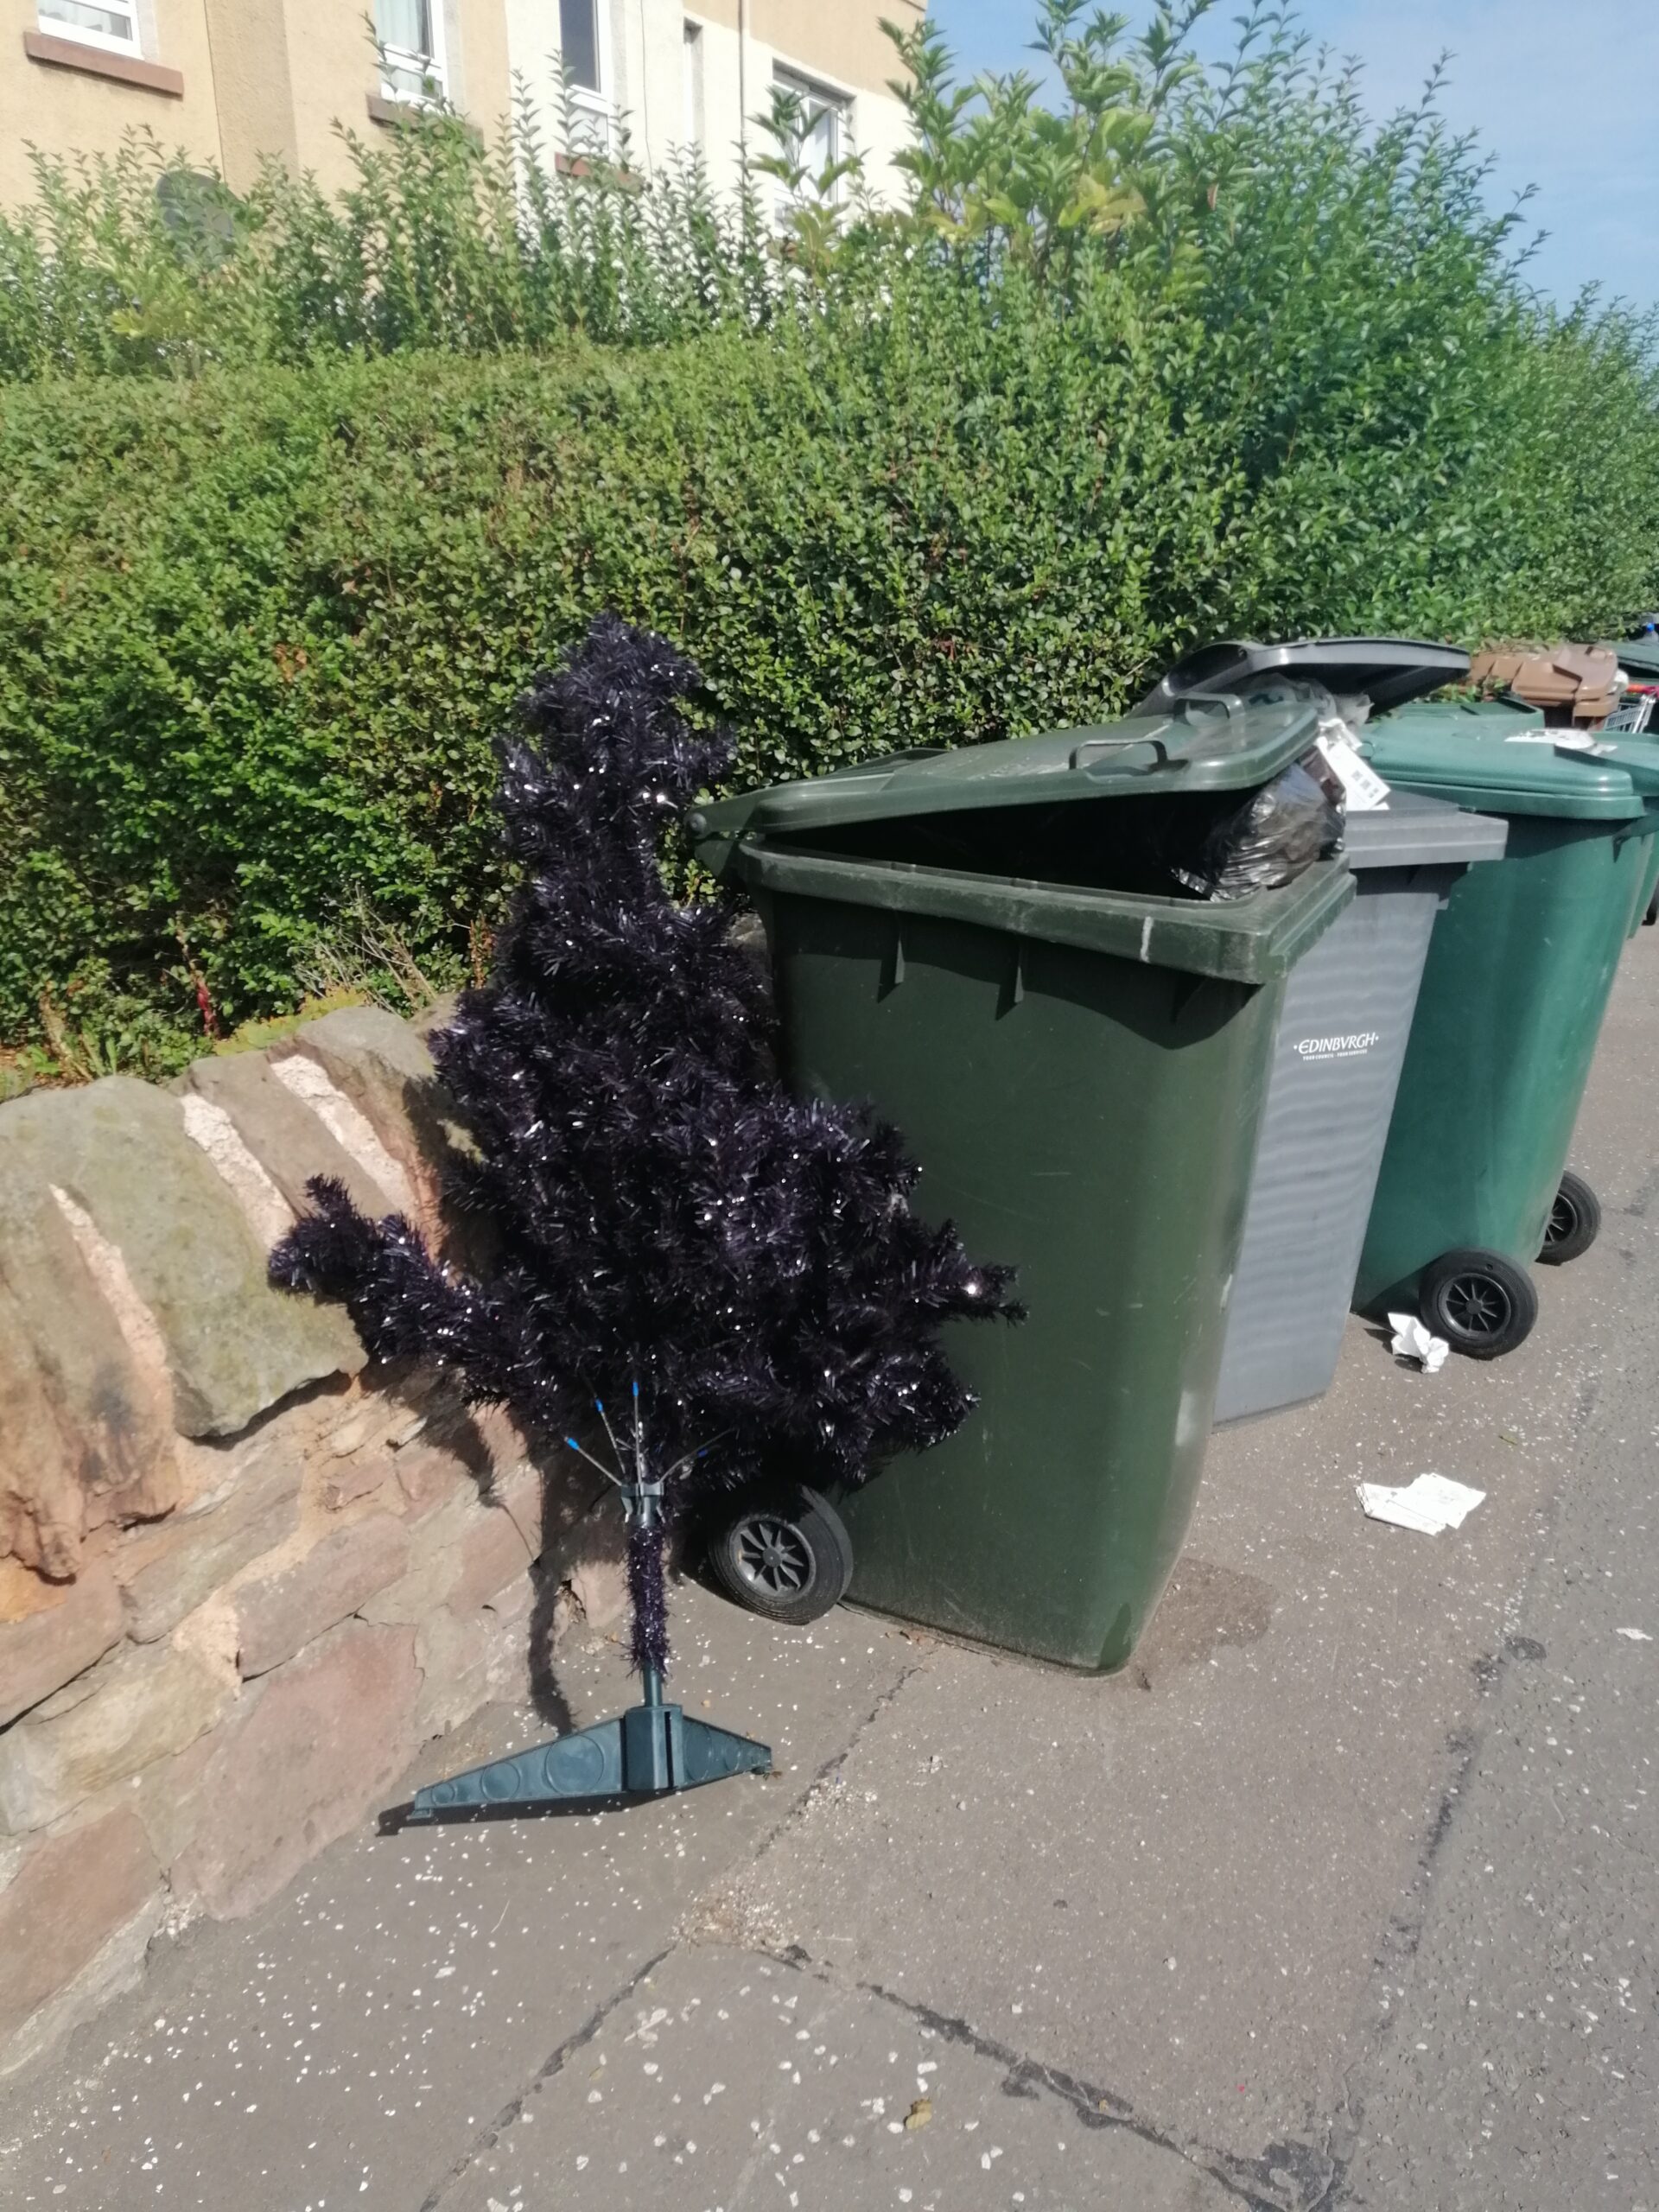 A broken purple artificial Christmas tree is propped up against a green domestic waste bin, in Edinburgh after 10 days of strike action.